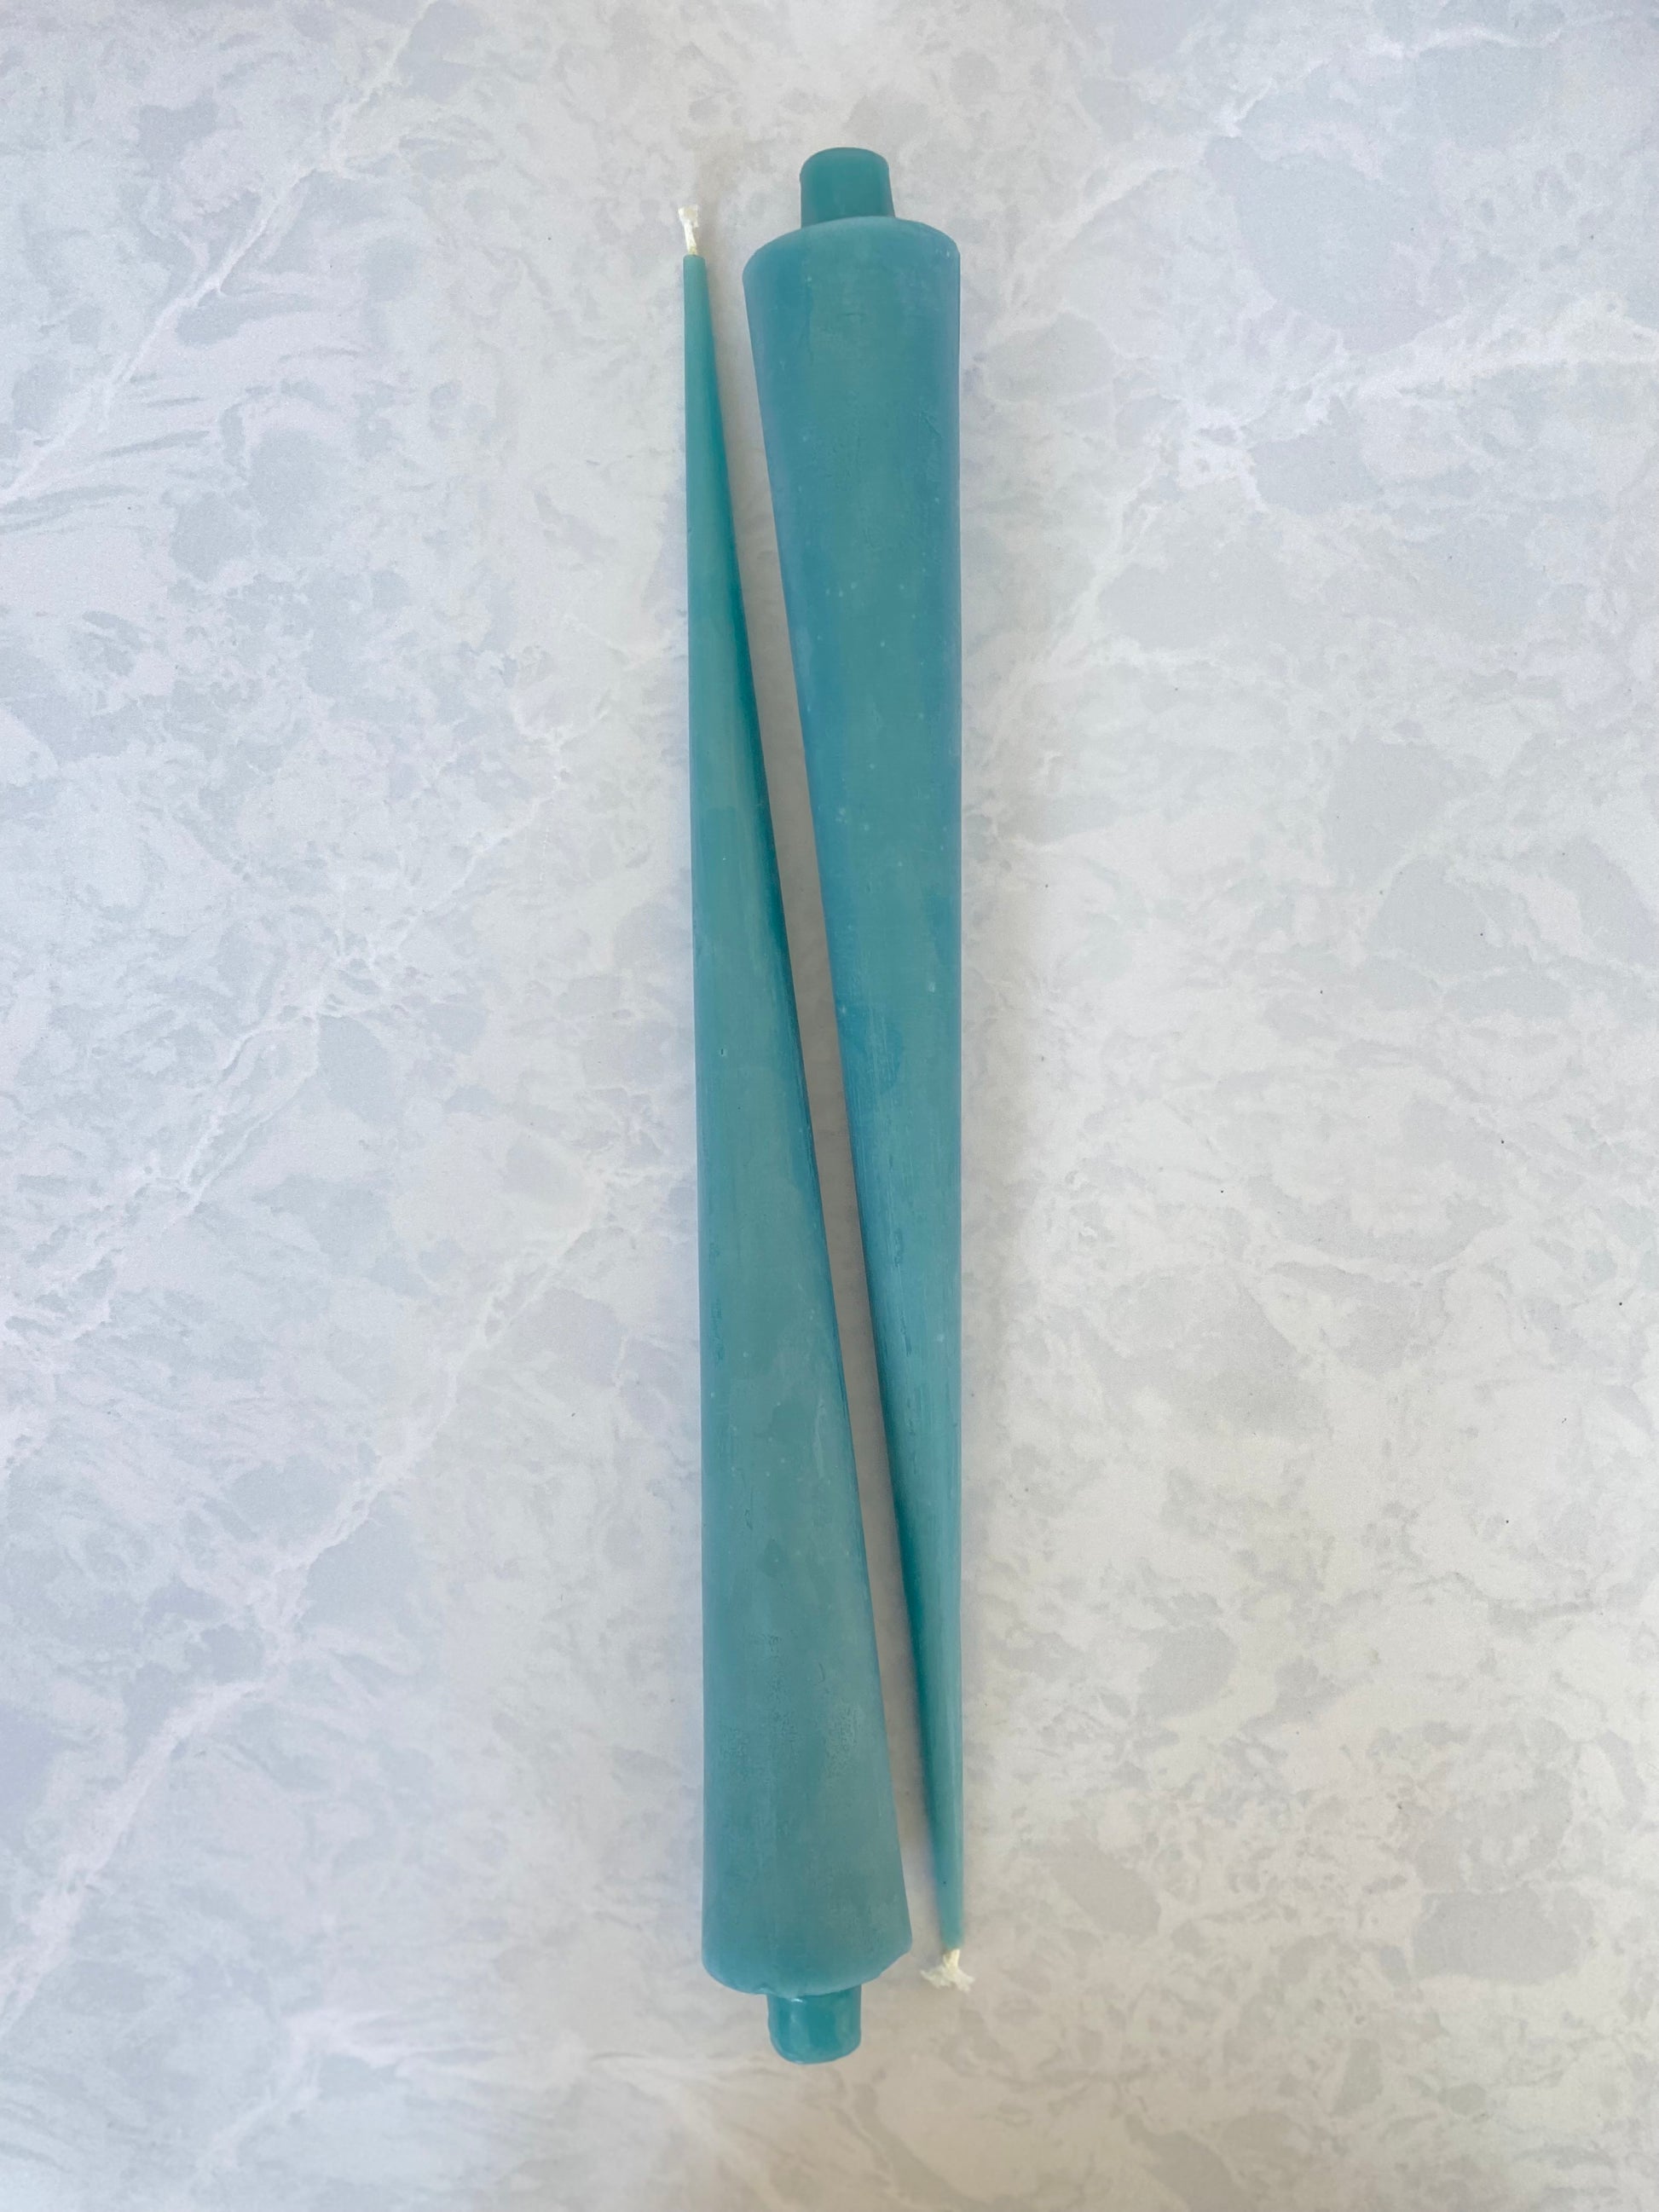 Beeswax Cone Shaped Taper Candle in Teal Blue Color for Sale